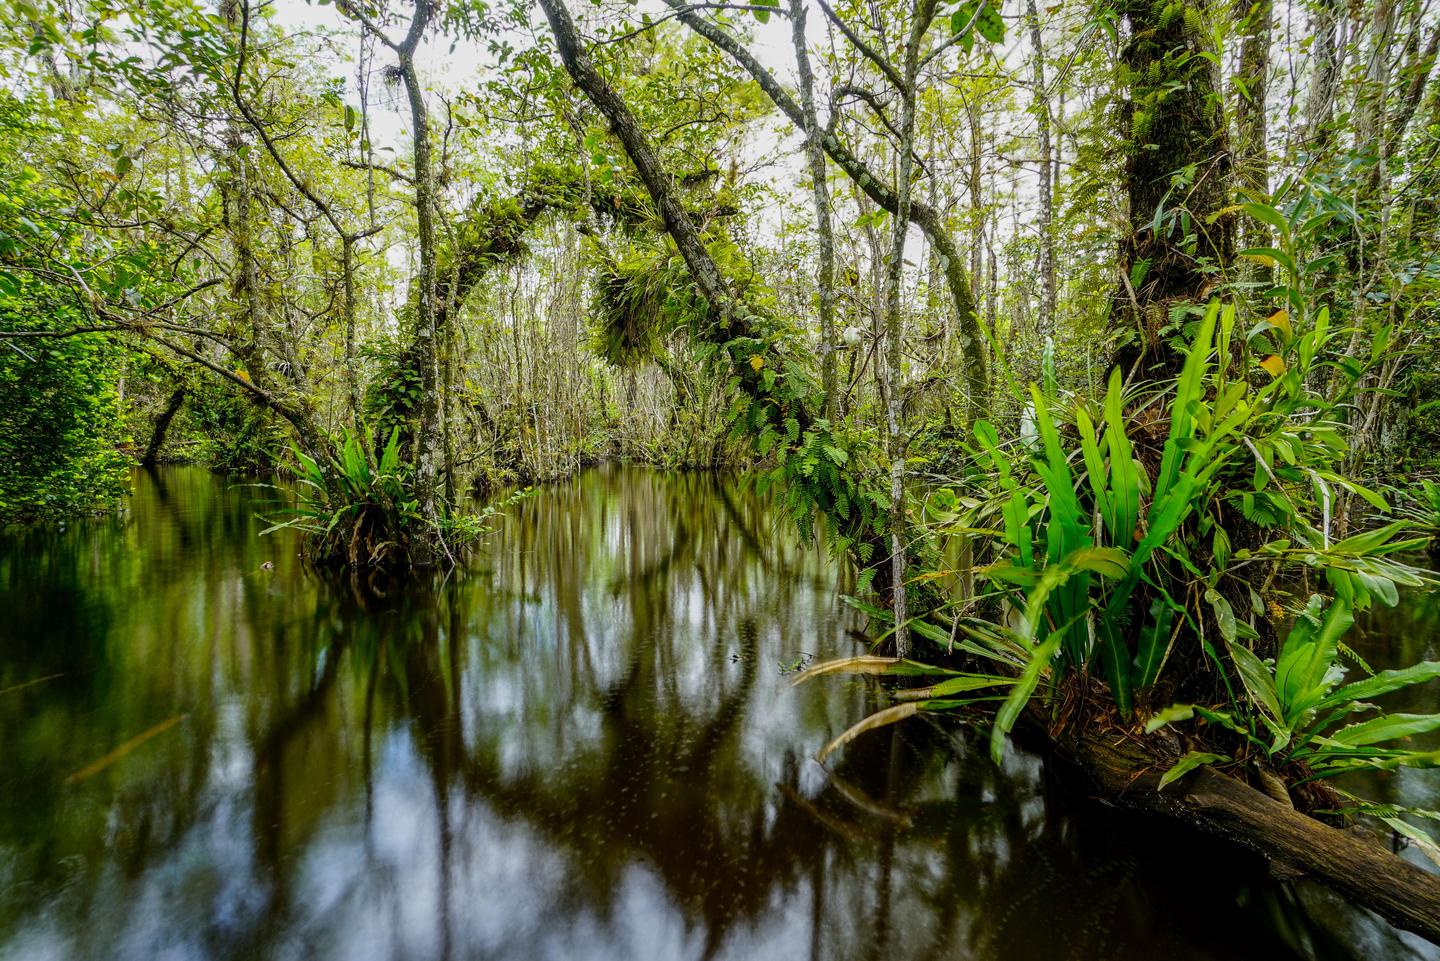 Depths of the SwampCypress swamps while appearing mysterious, are peaceful and serene.